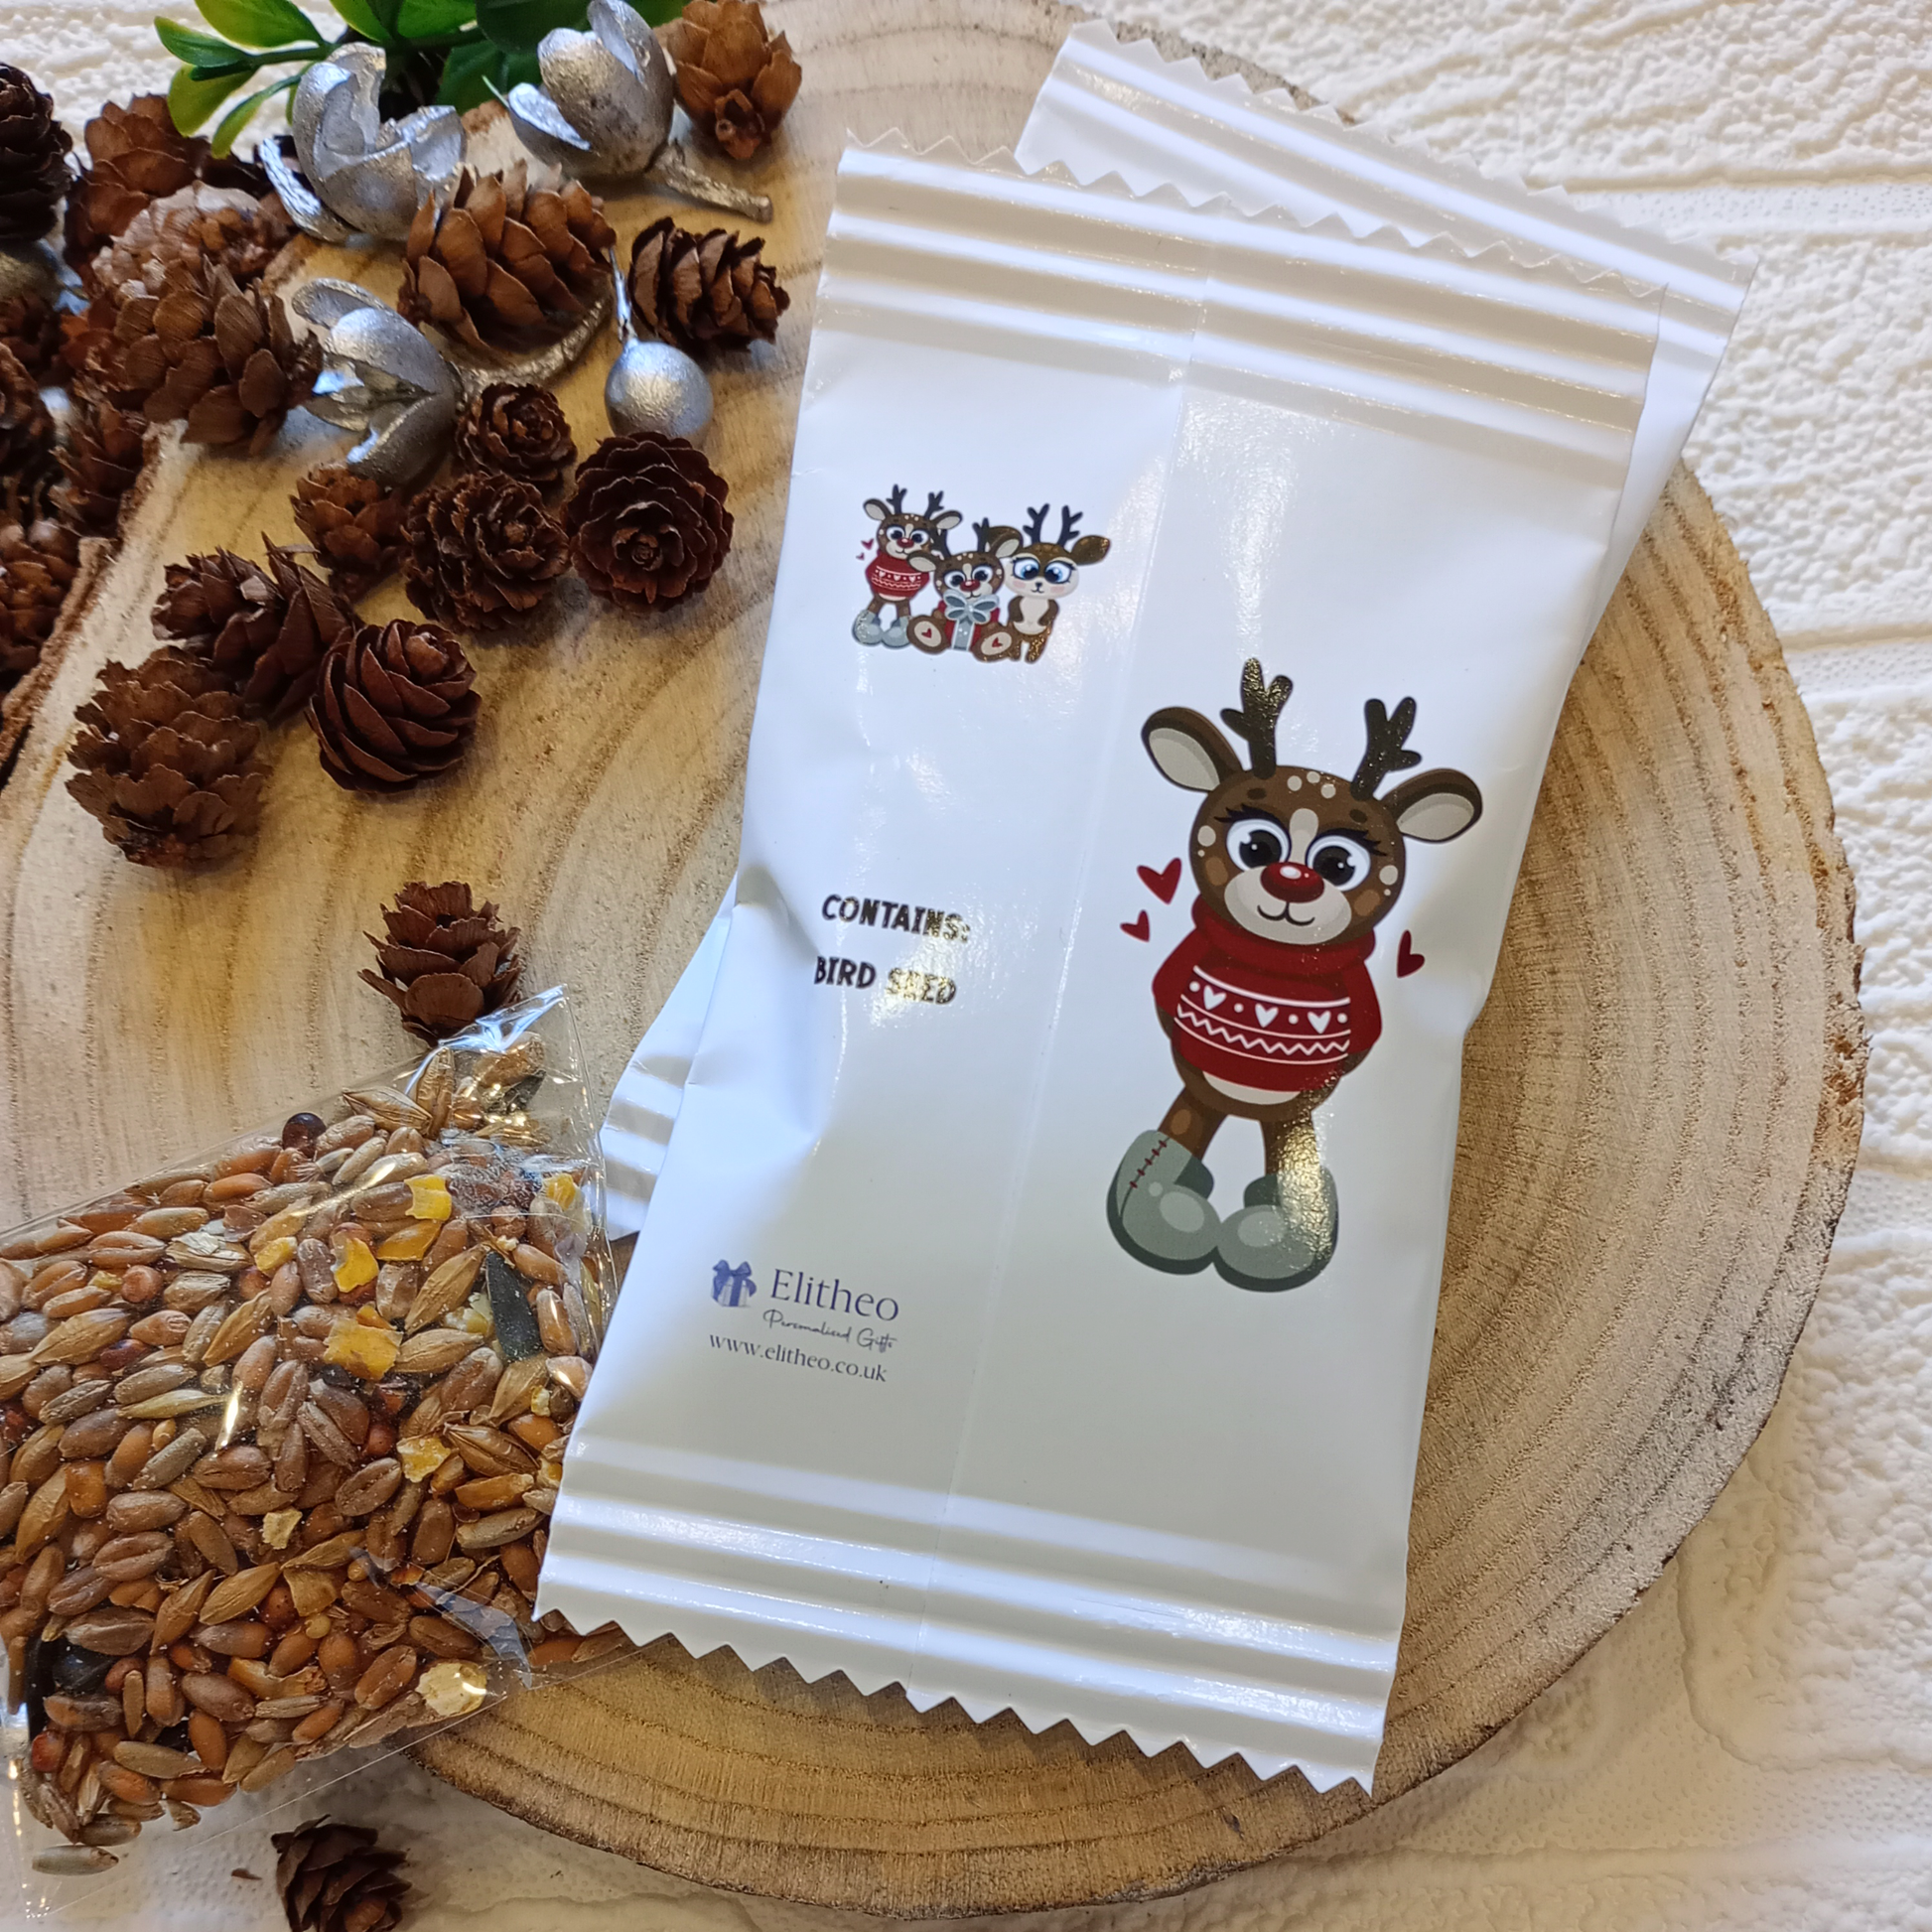 Personalised reindeer food packets containing bird seed.